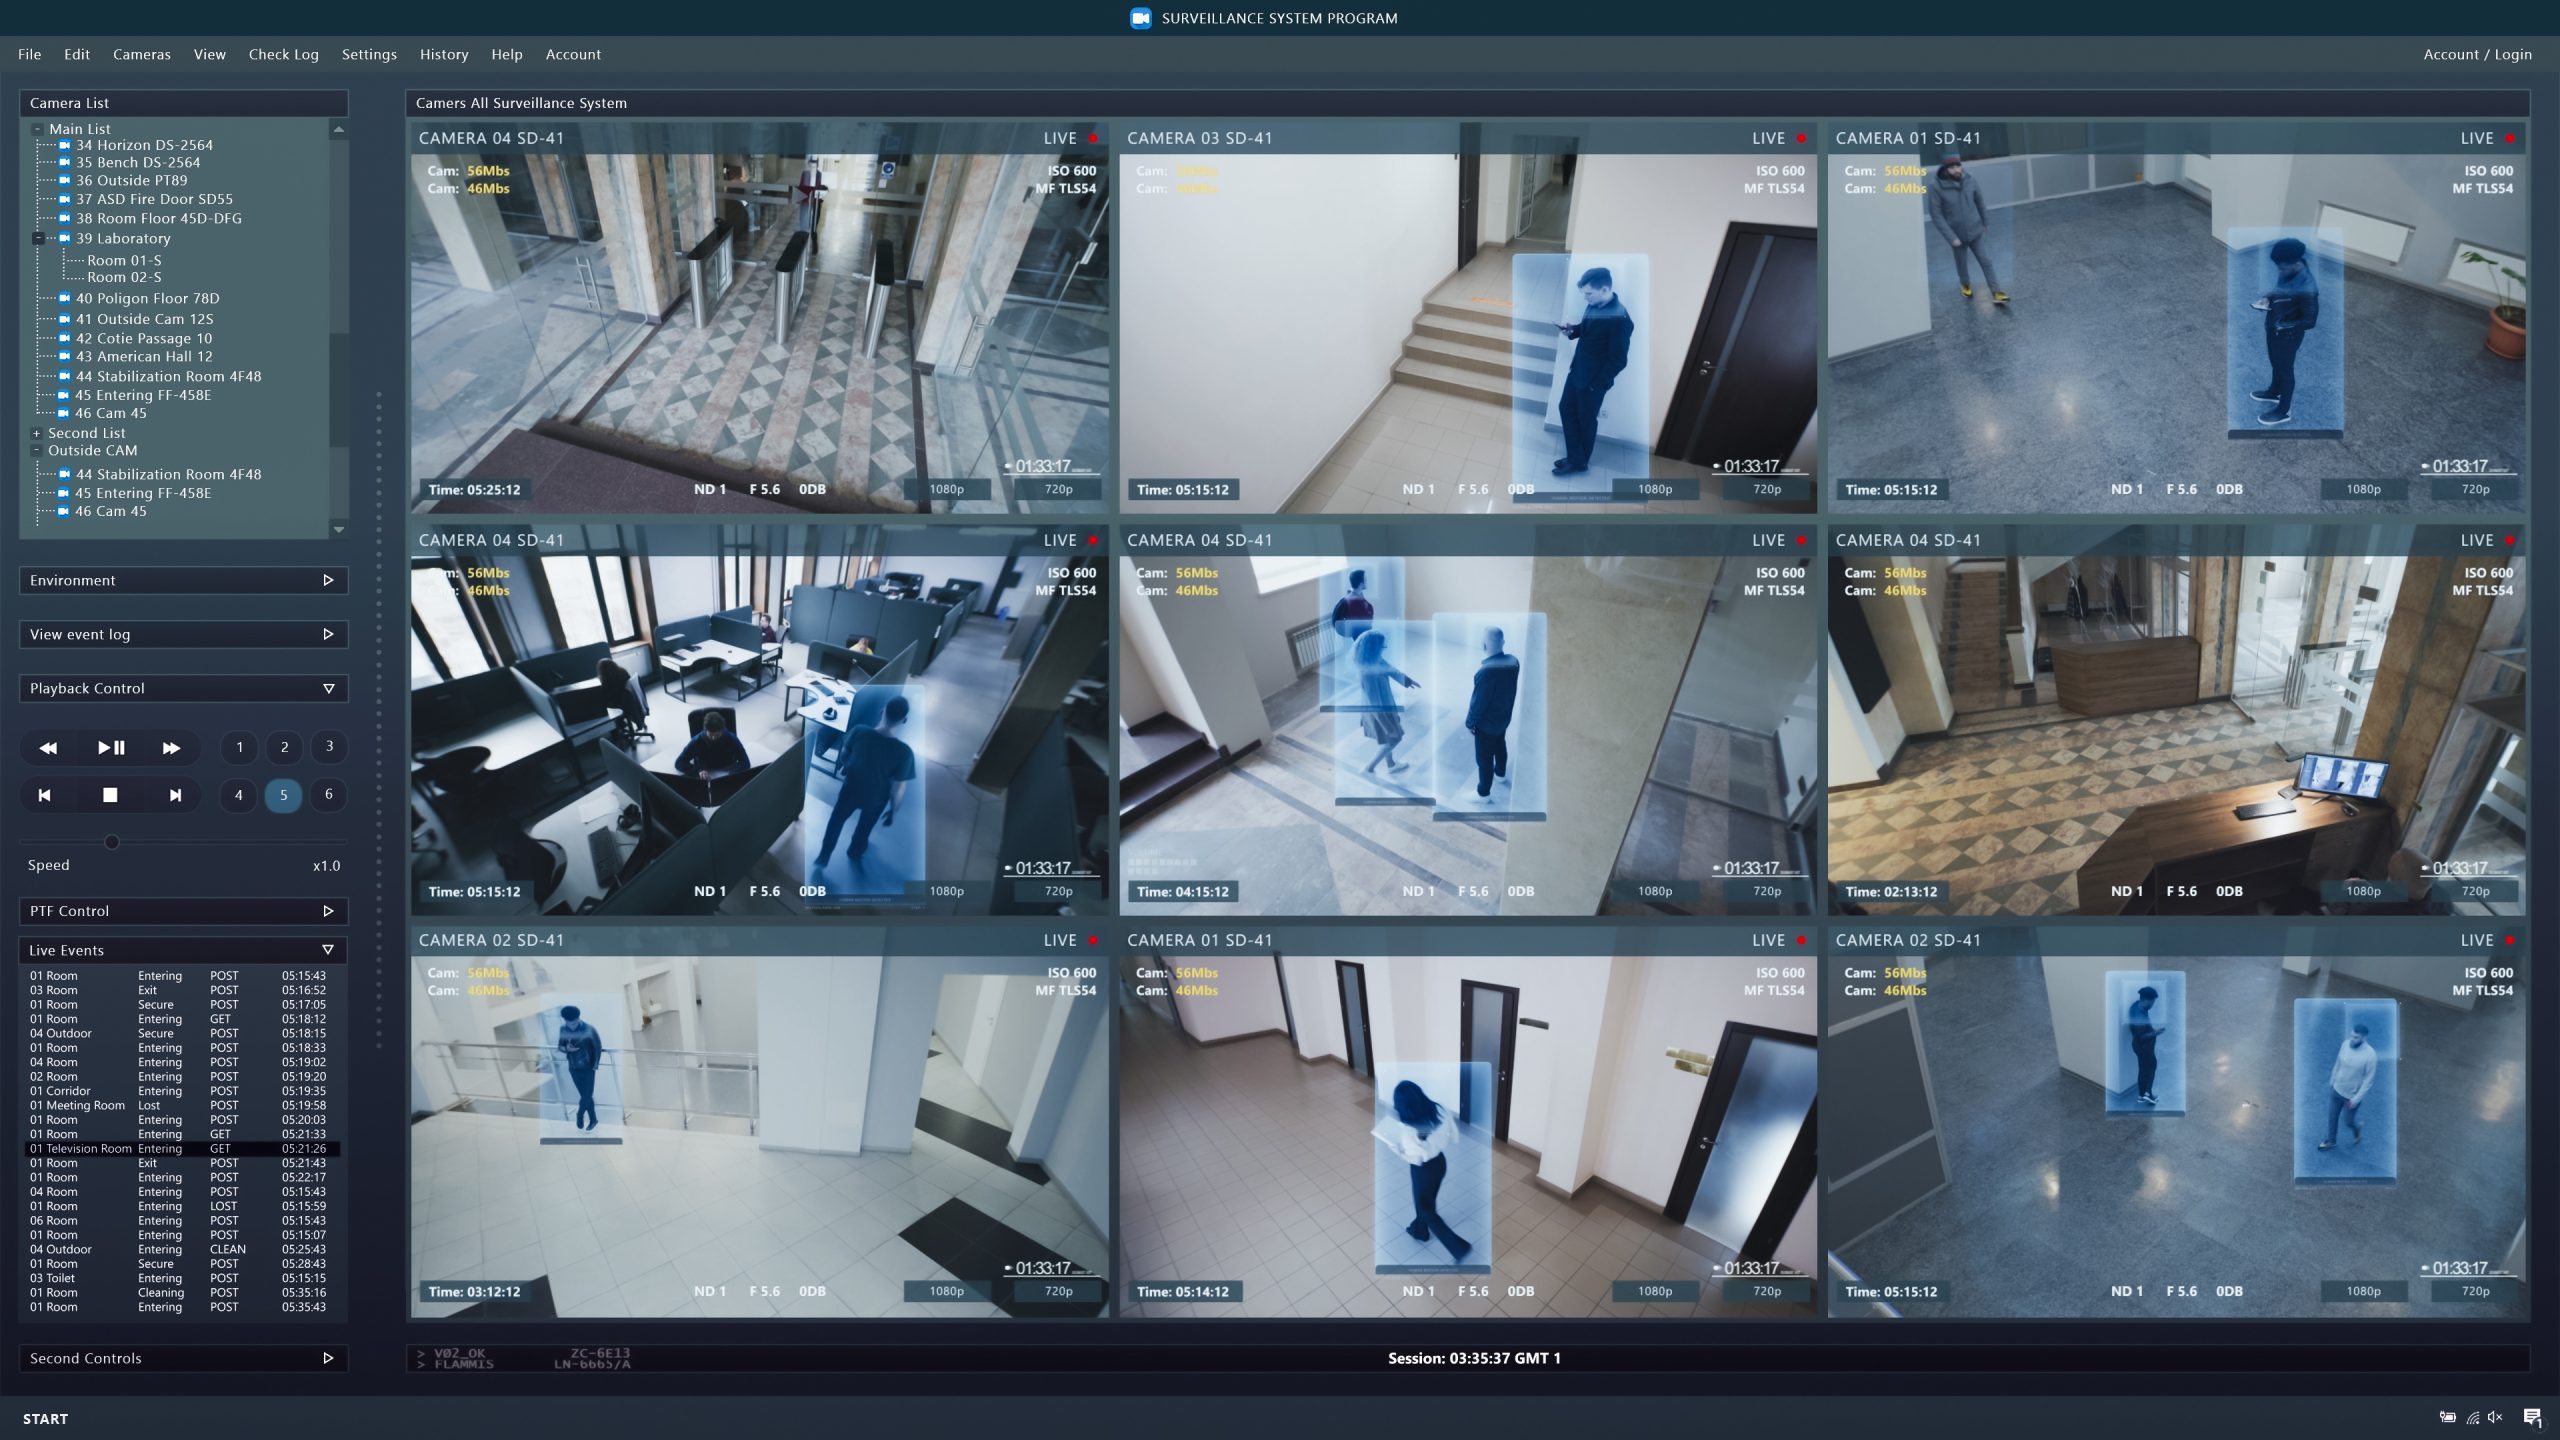 CCTV cameras playback on computer screen. People walk in coworking office. Security cameras. Surveillance and observation digital system.